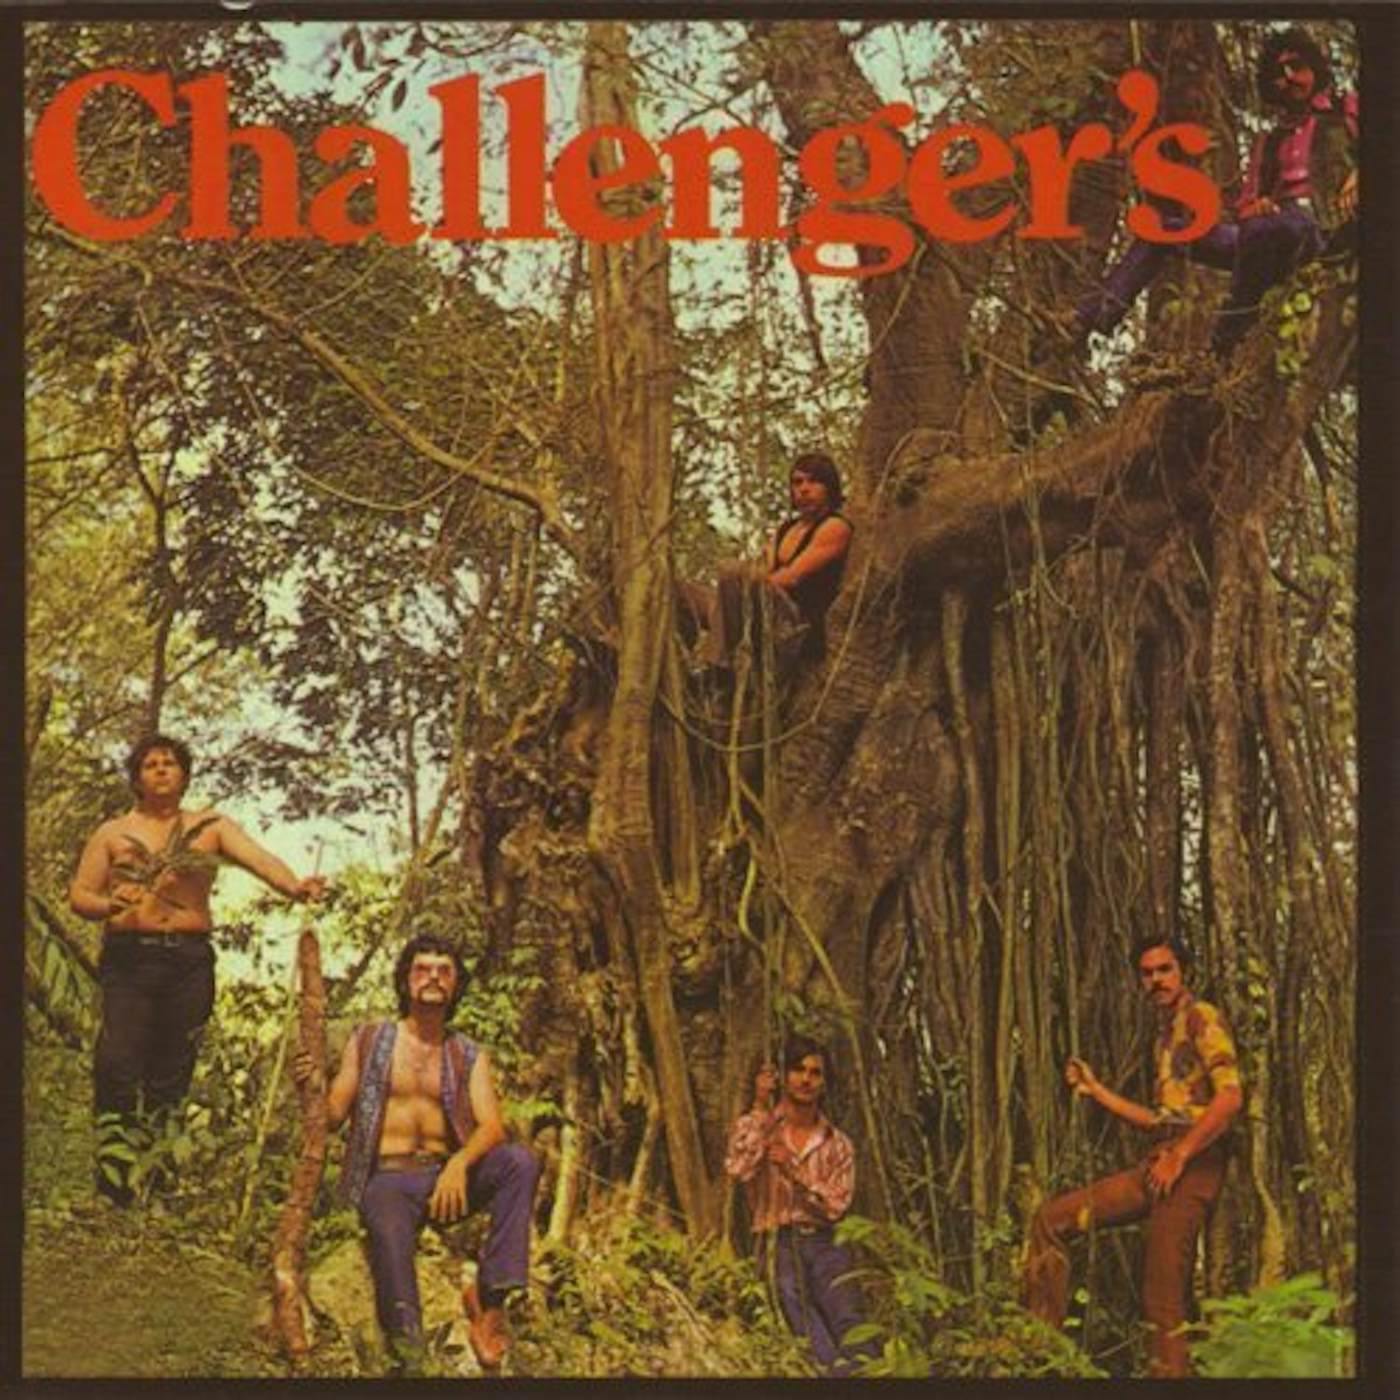 The Challengers CD